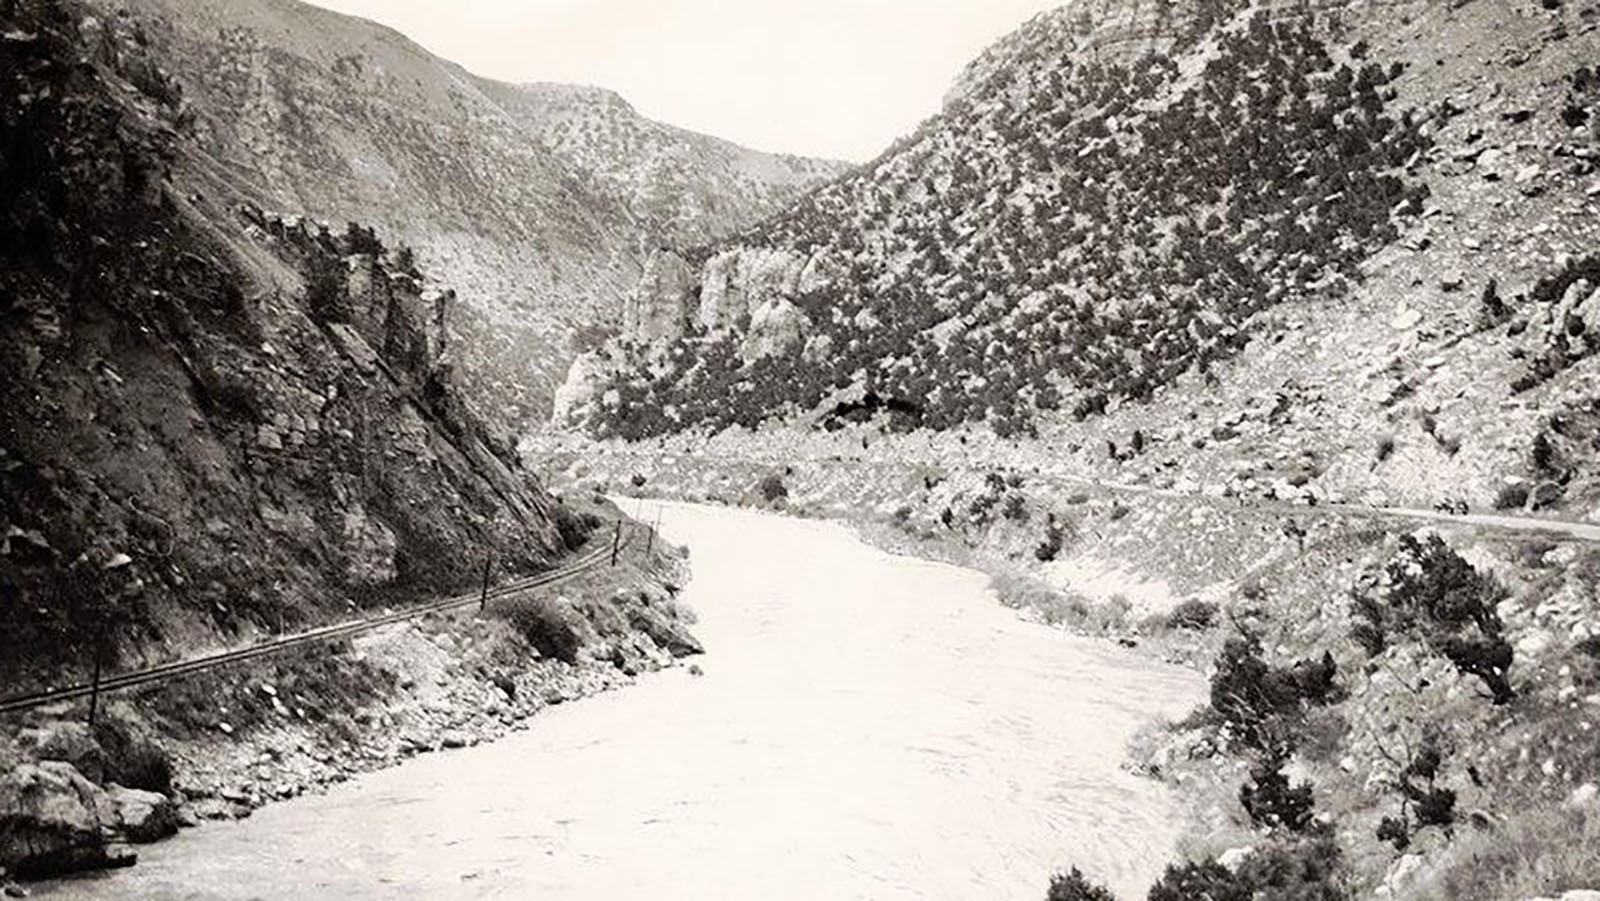 View of the Yellowstone Highway through Wind River Canyon showing road and early railroad in an undated photo.